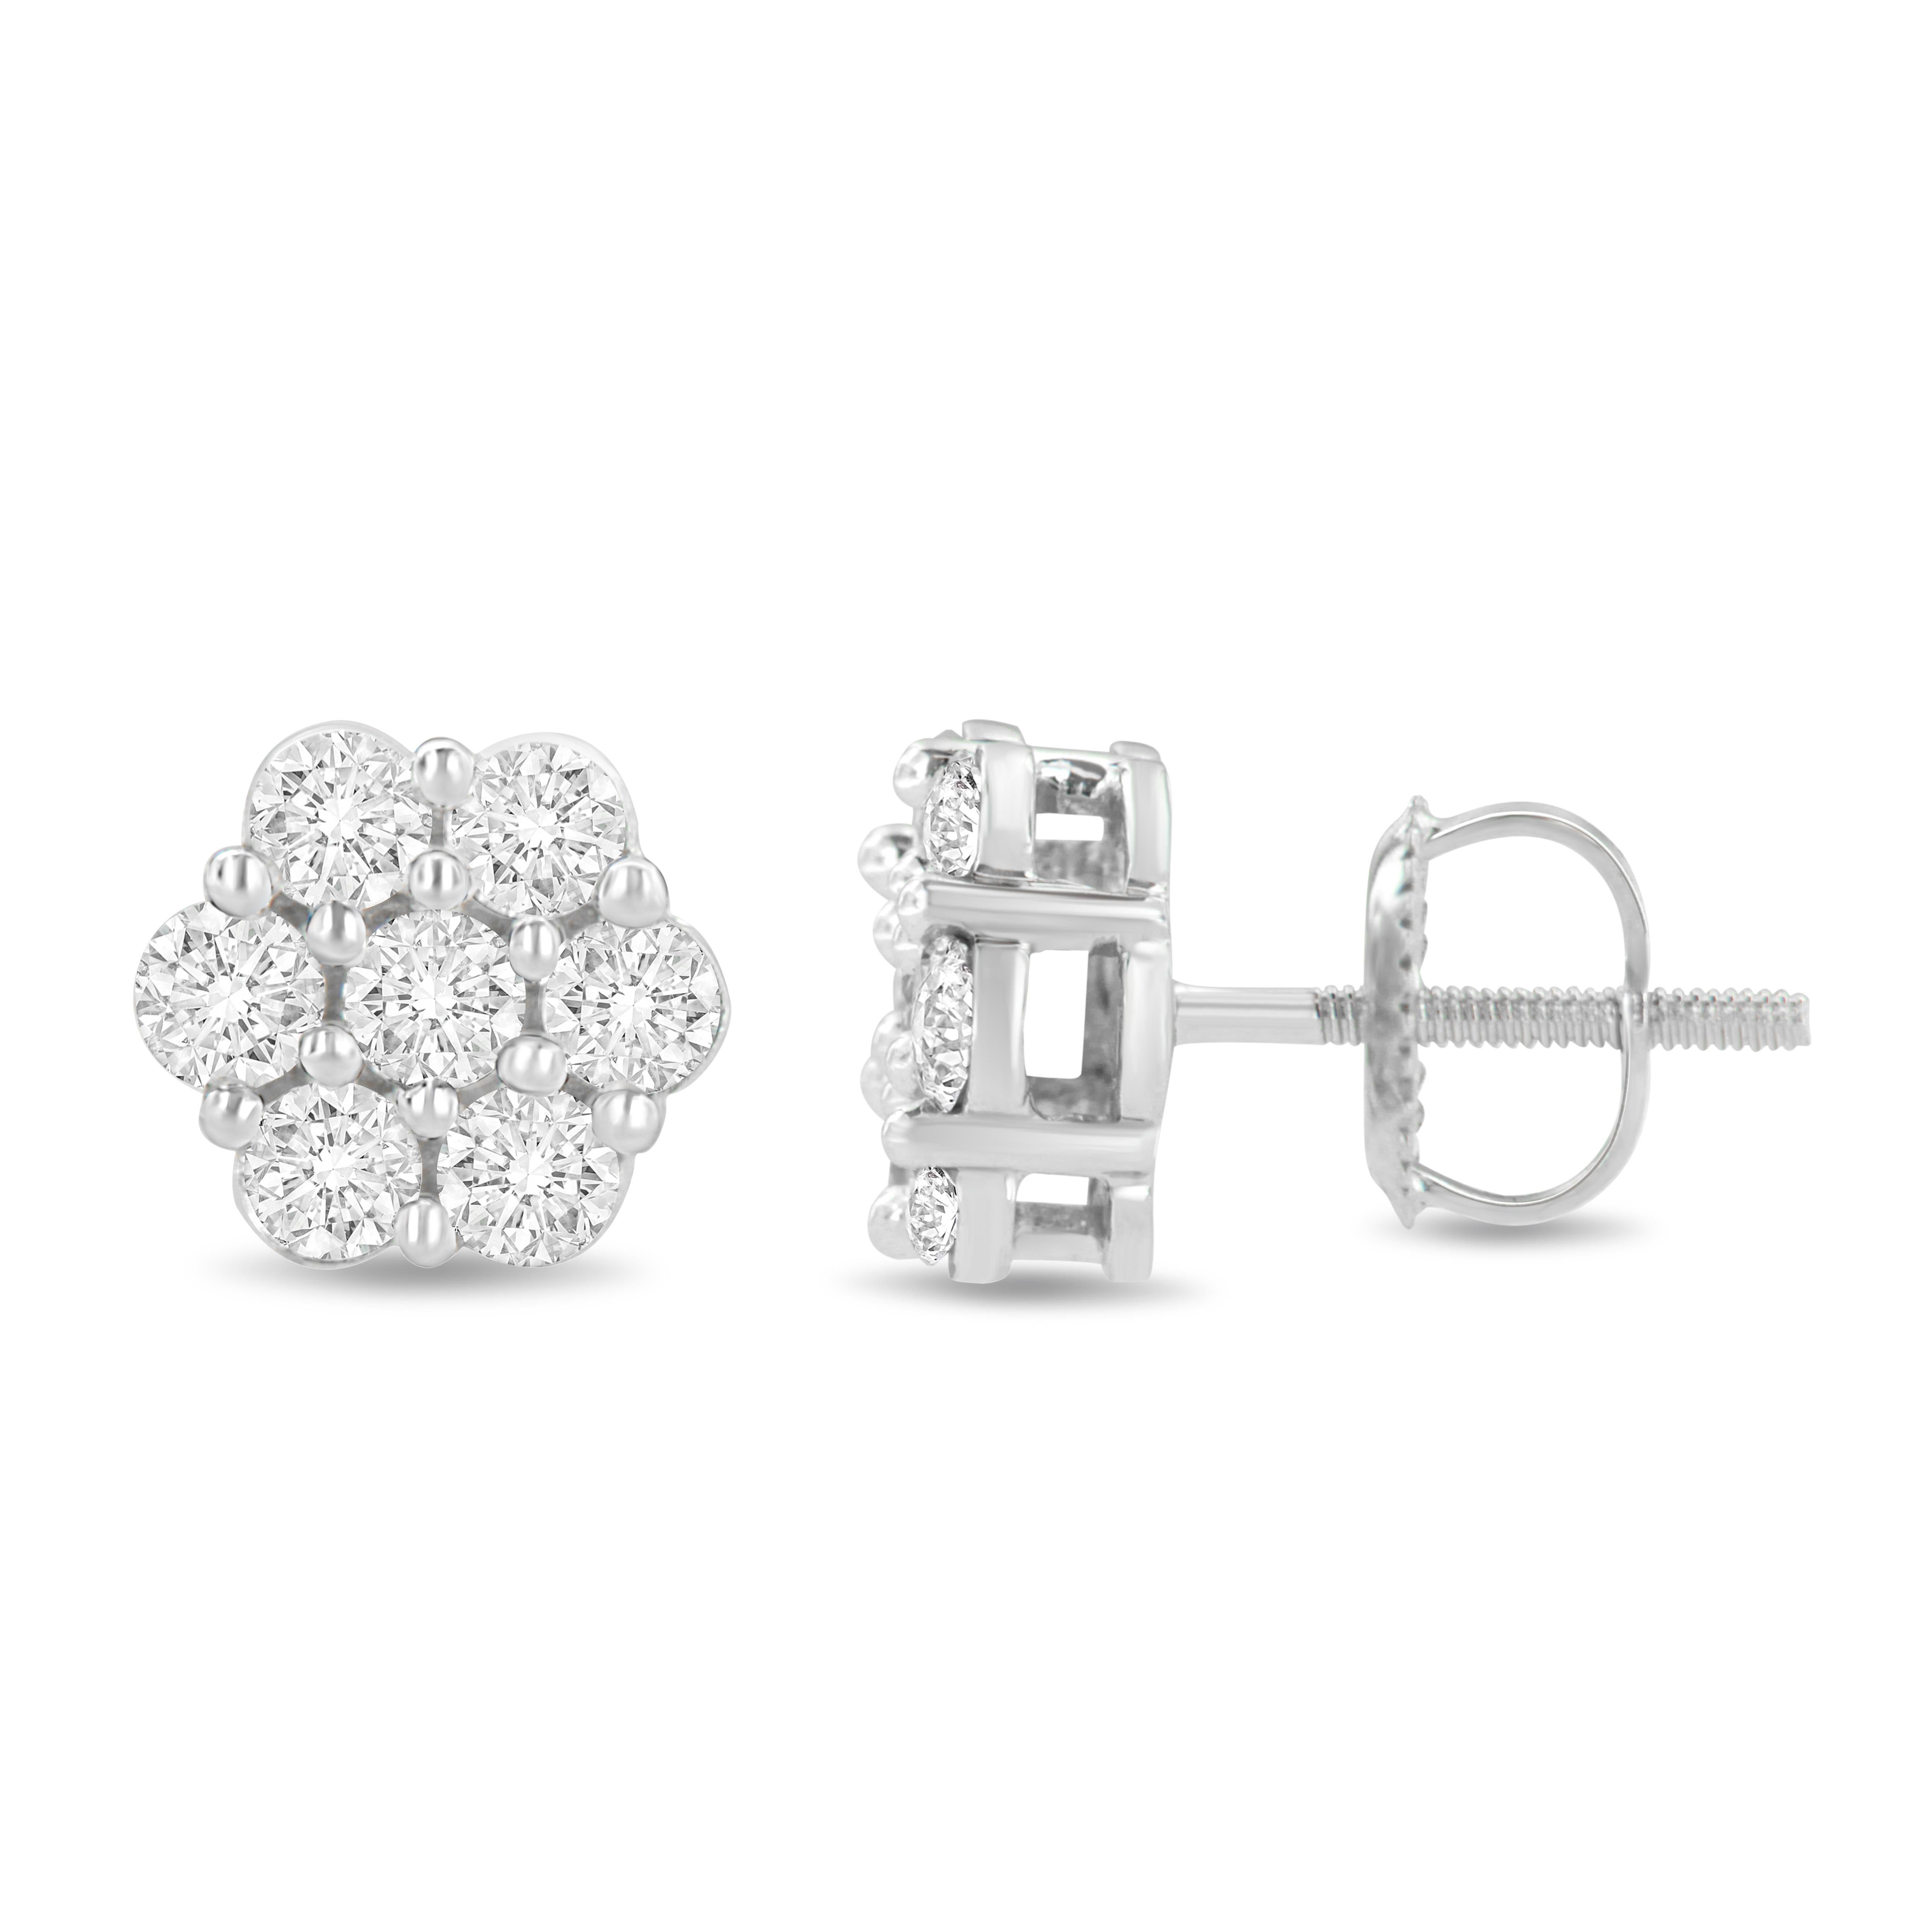 These gorgeous floral cluster studs are made with 7 round-cut diamonds each. Designed in the finest 14k white gold, these earrings are embellished with stunning round-cut, prong set diamonds. This piece boasts an impressive total diamond weight of 1